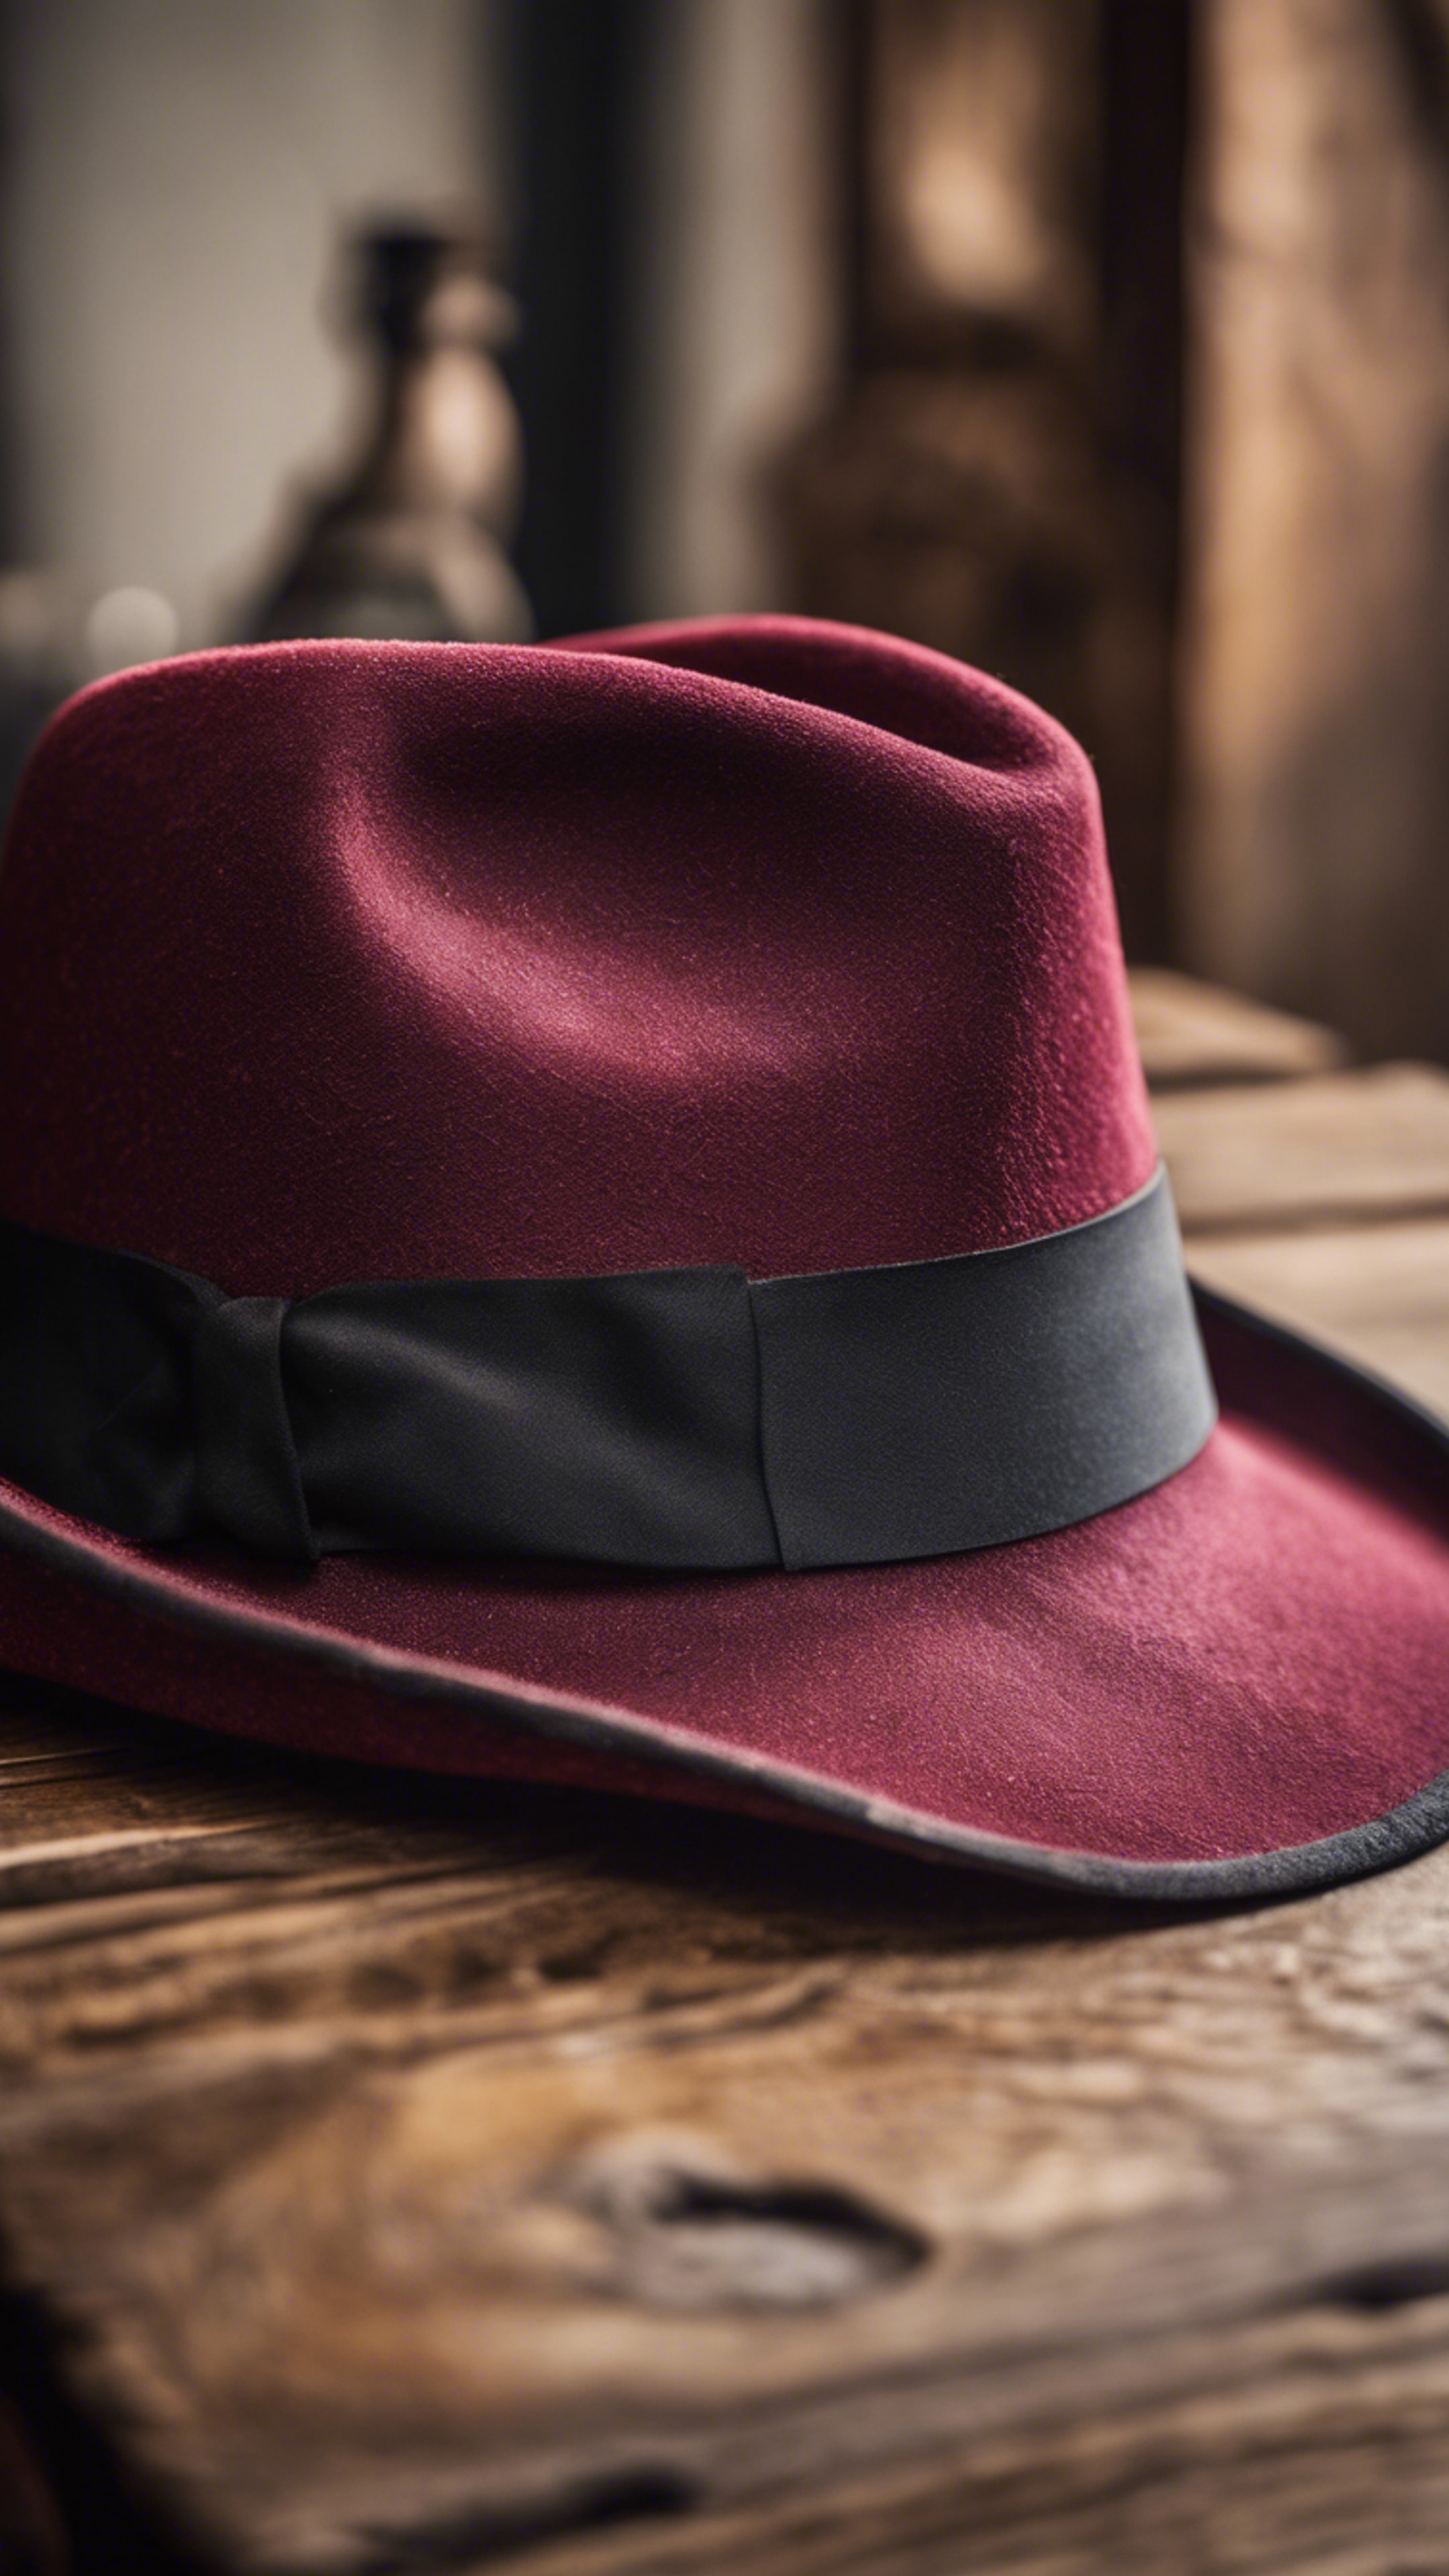 A cool maroon fedora hat positioned on an antique wooden table. Papel de parede[05b3f475f93c4ade83cc]